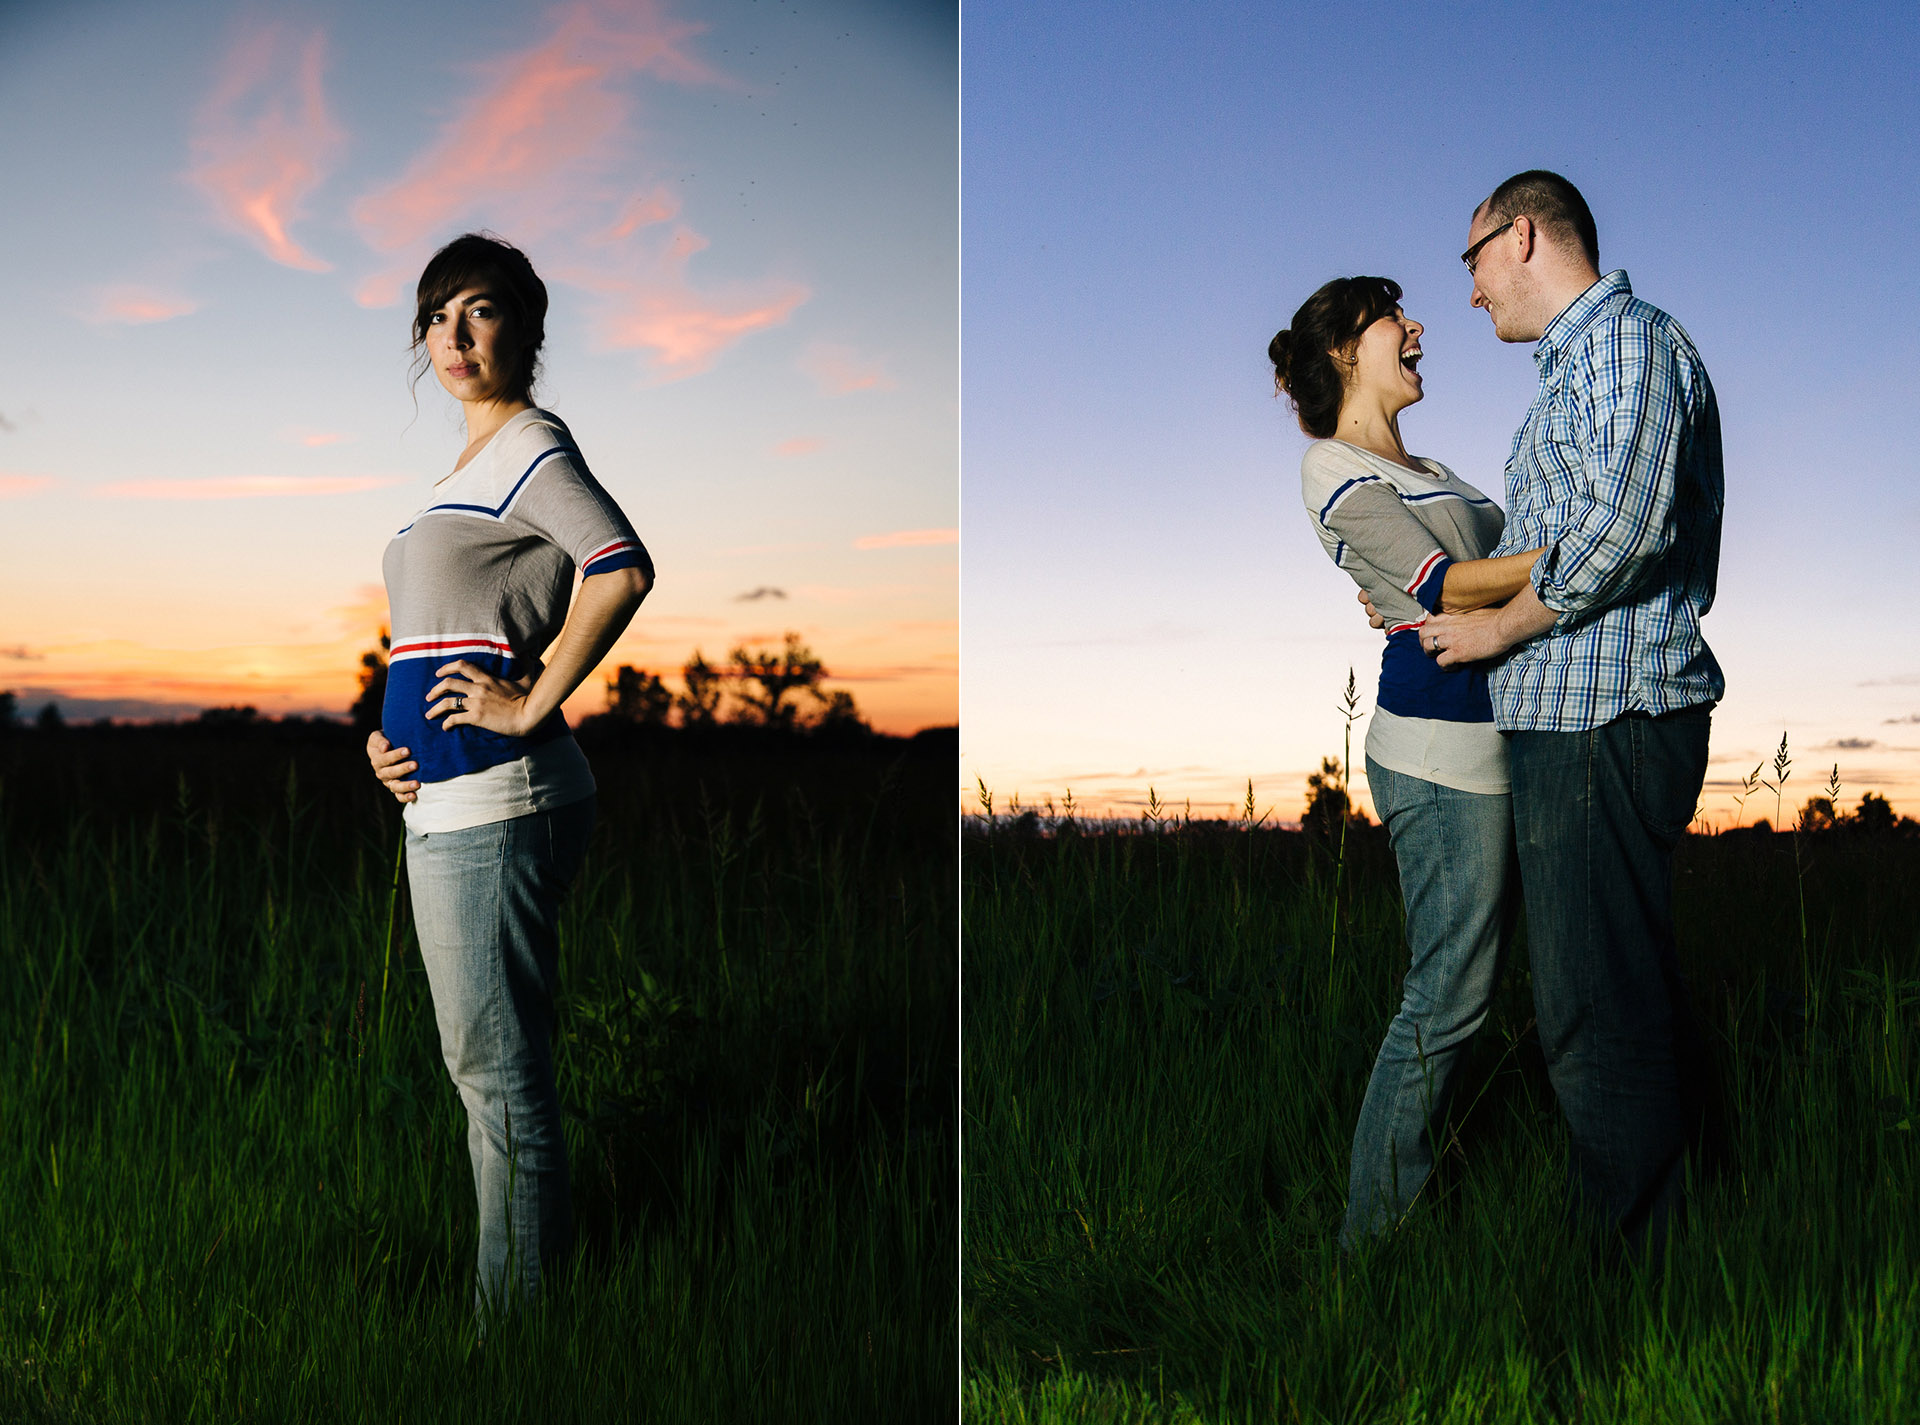 Angela Clunk Maternity Photos During Pregnancy - too much awesomeness photography - image 06-2.jpg